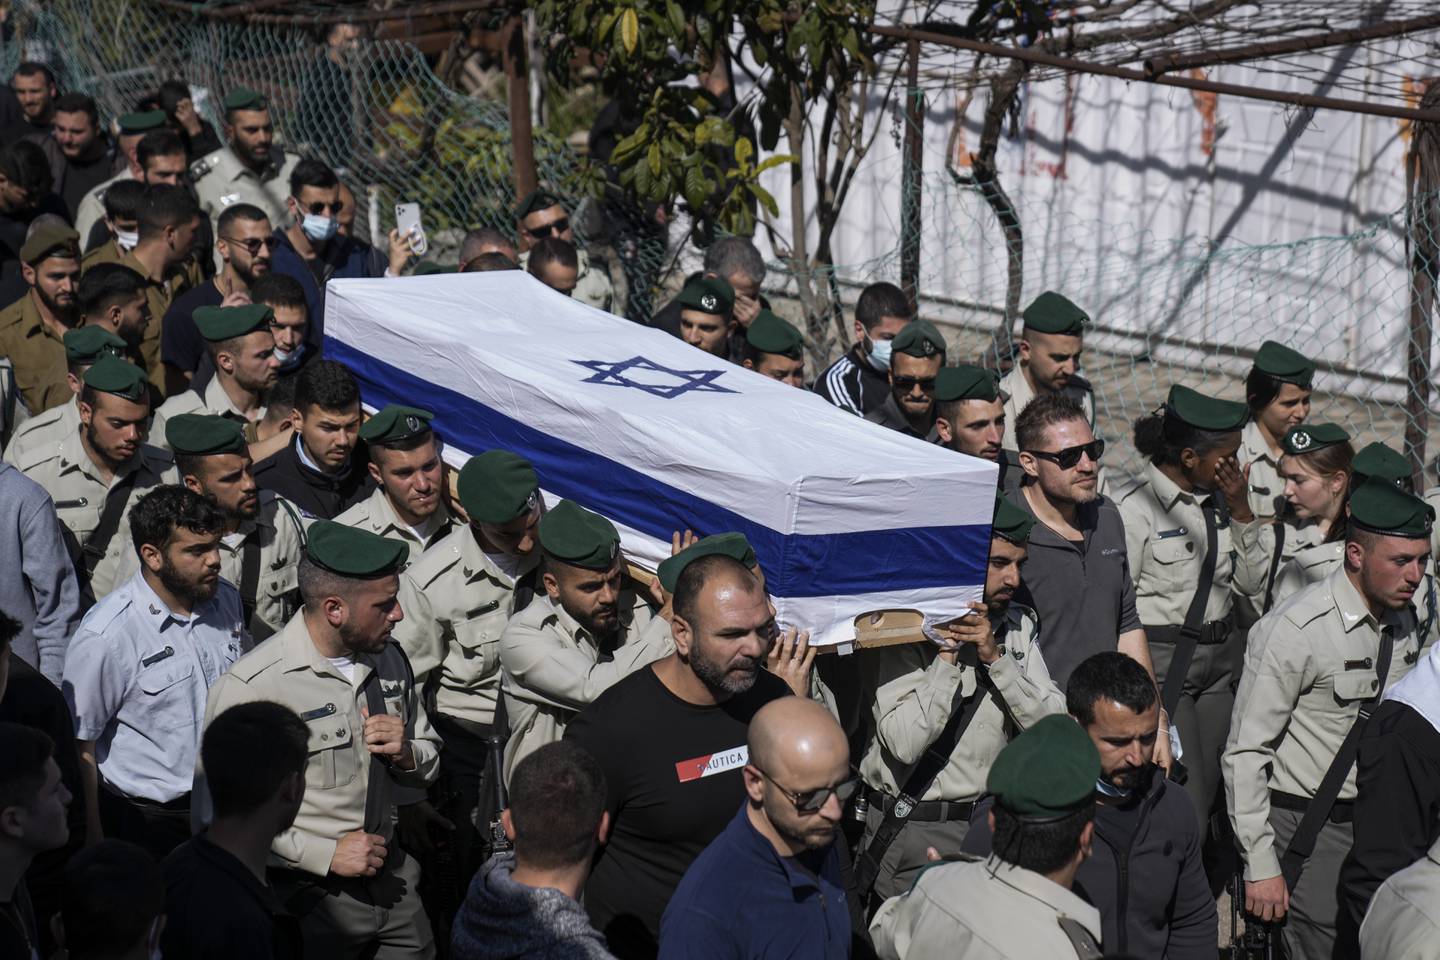 Border police carry the coffin of Israeli border officer Yezen Falah, 19, at his funeral in Kisra-Sumei, northern Israel, on Monday, in an attack for which ISIS claimed responsibility. AP